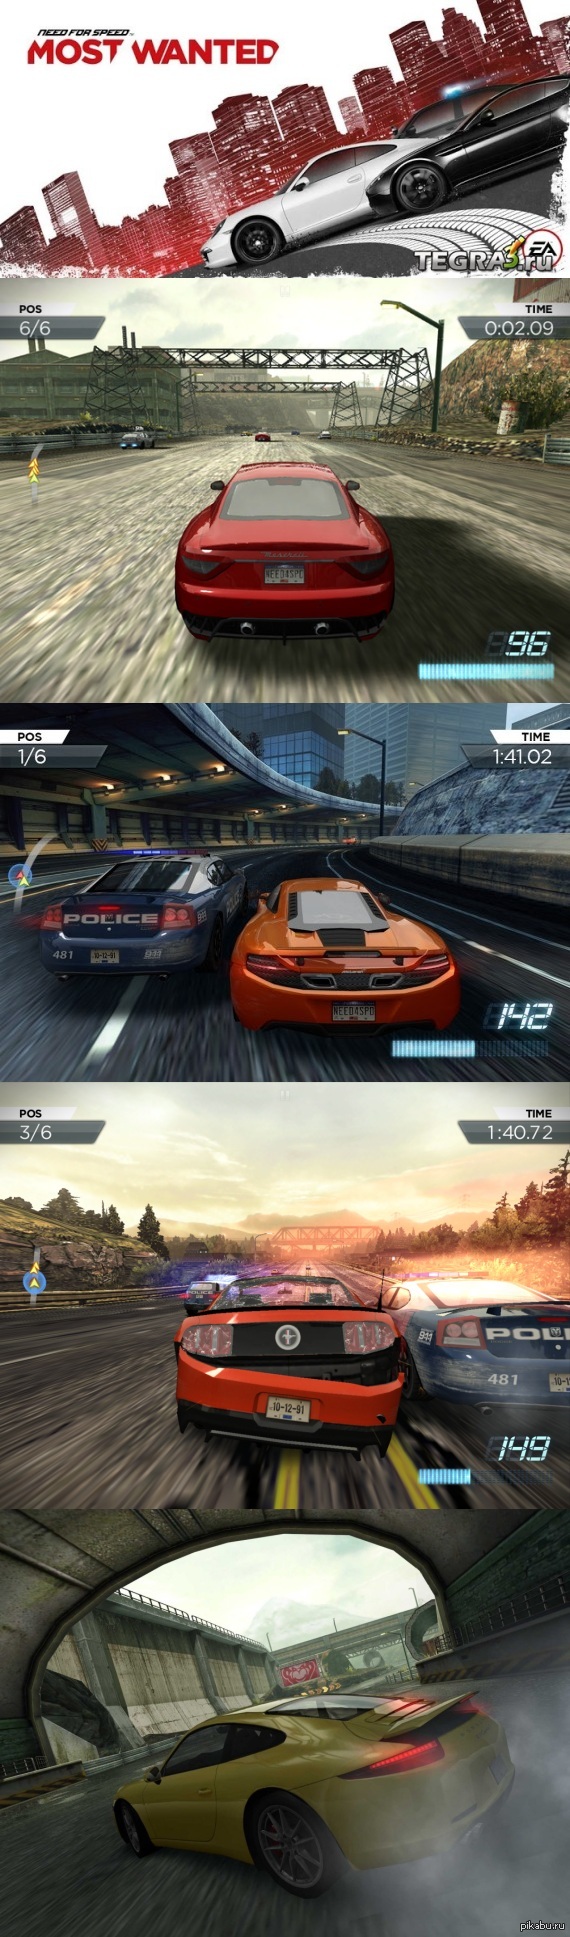 Most Wanted (android) -  !!!   ,      -  -  .     NFS3.